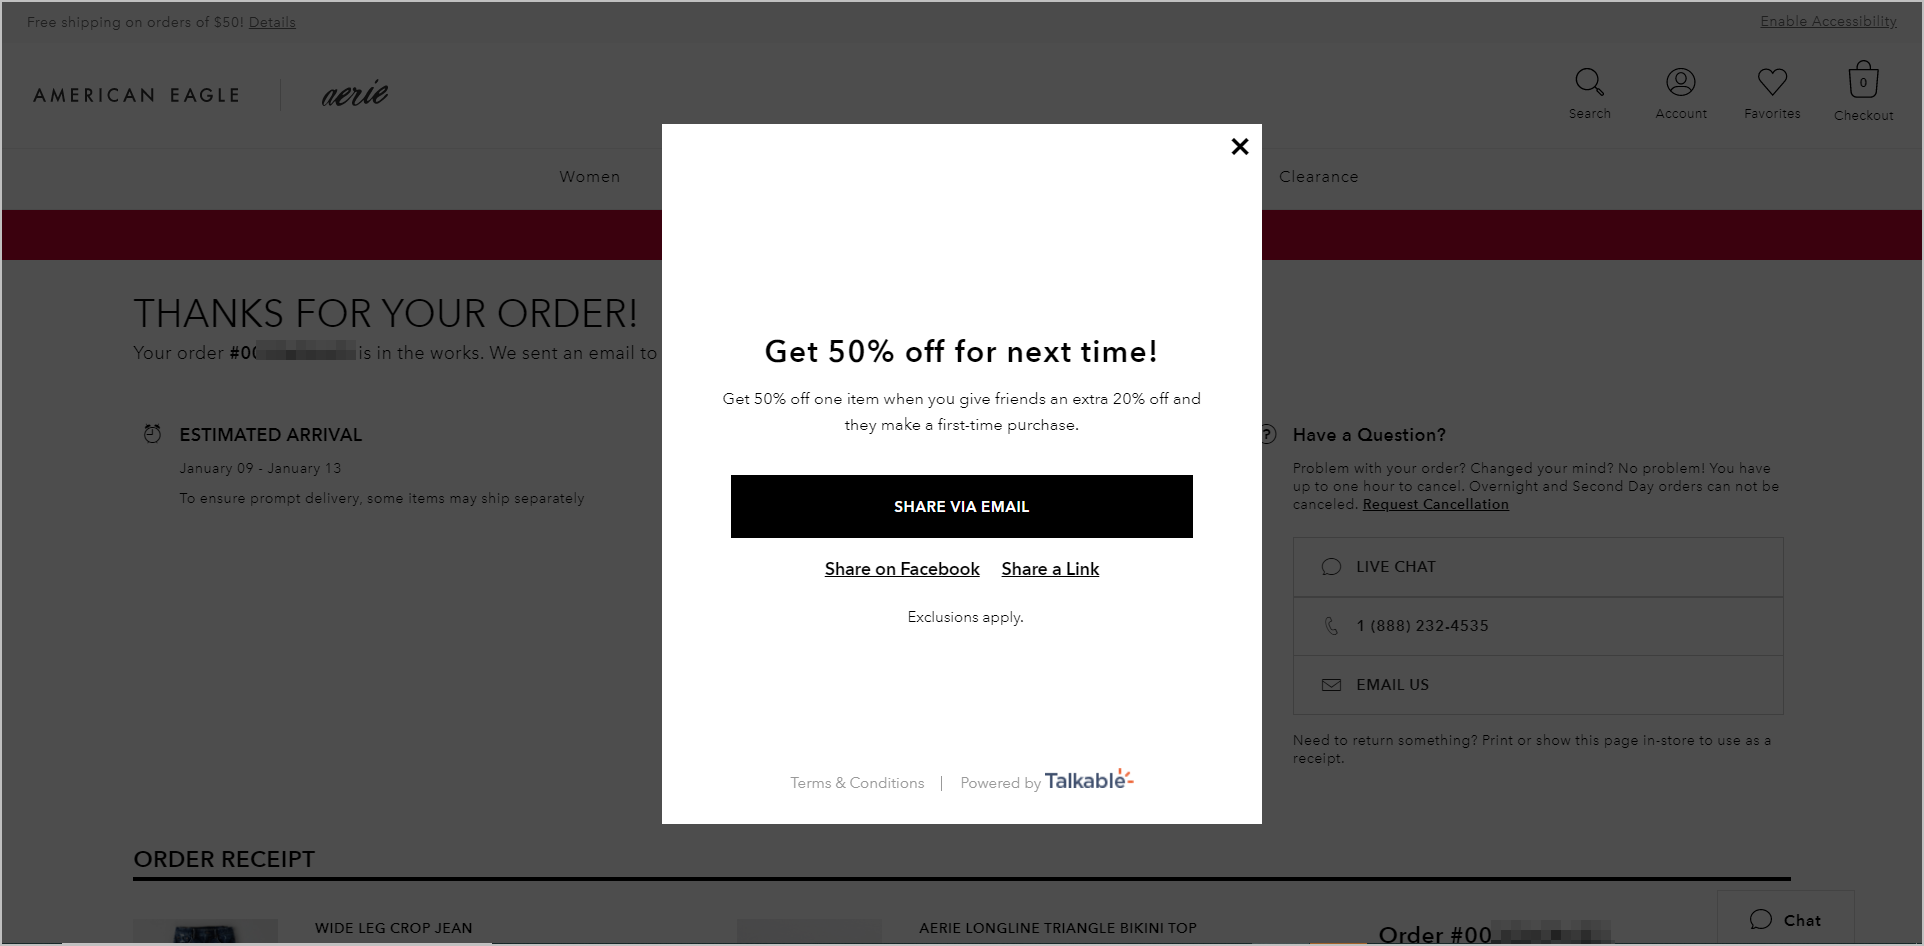 improve post-purchase experience - social media sharing with incentive example - american eagle modal that pops up after the customer submits an order. it offers the customer 50% off towards their next order and the friend gets an extra 20% off when the latter makes a firt-time purchase. "share via email" is in white text in a black CTA button. "share on facebook" and "share a link" are text links